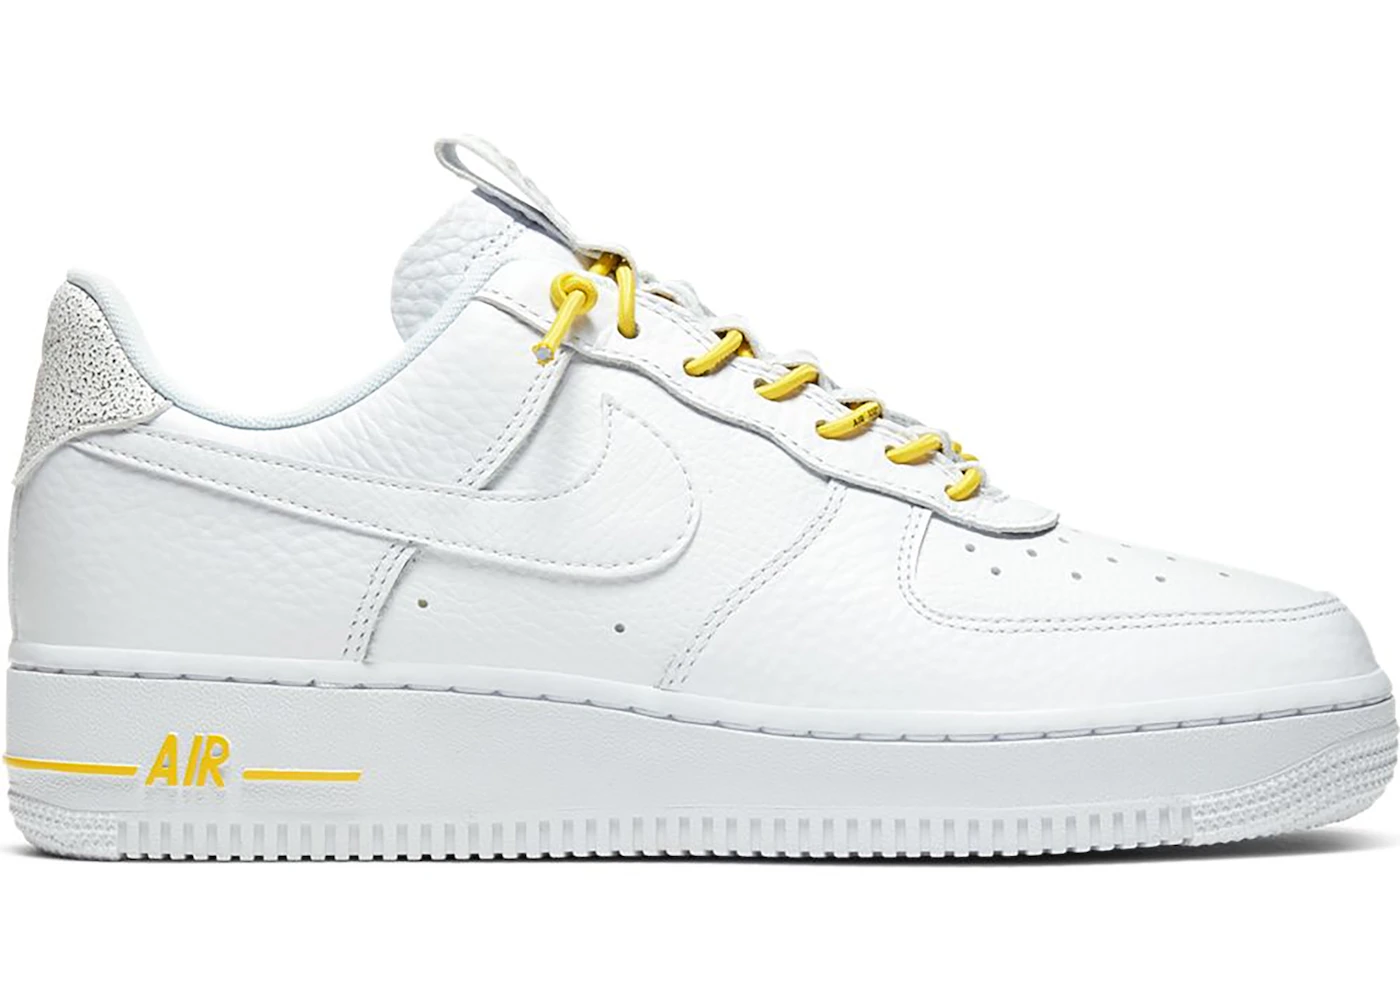 Nike Air Force 1 Low Lux White Chrome Yellow (Women's)